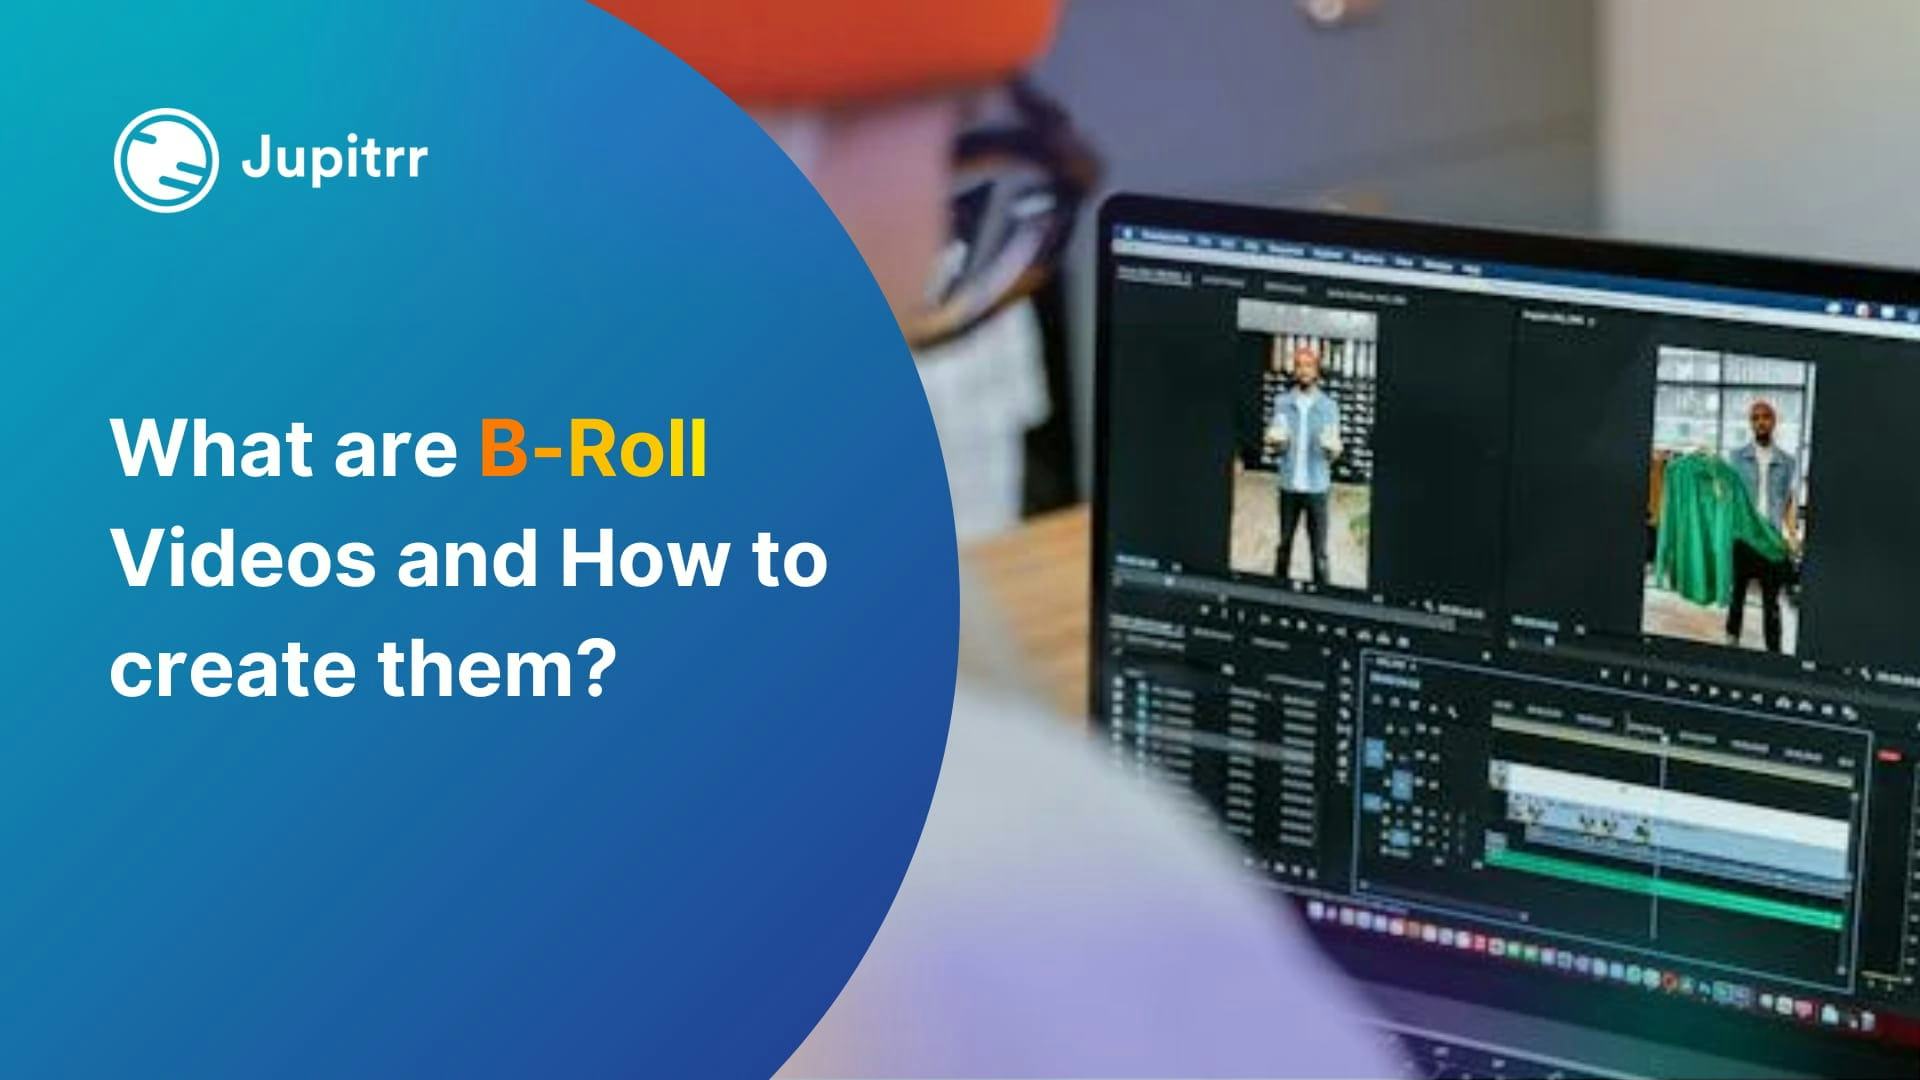 What is B-Roll Video?